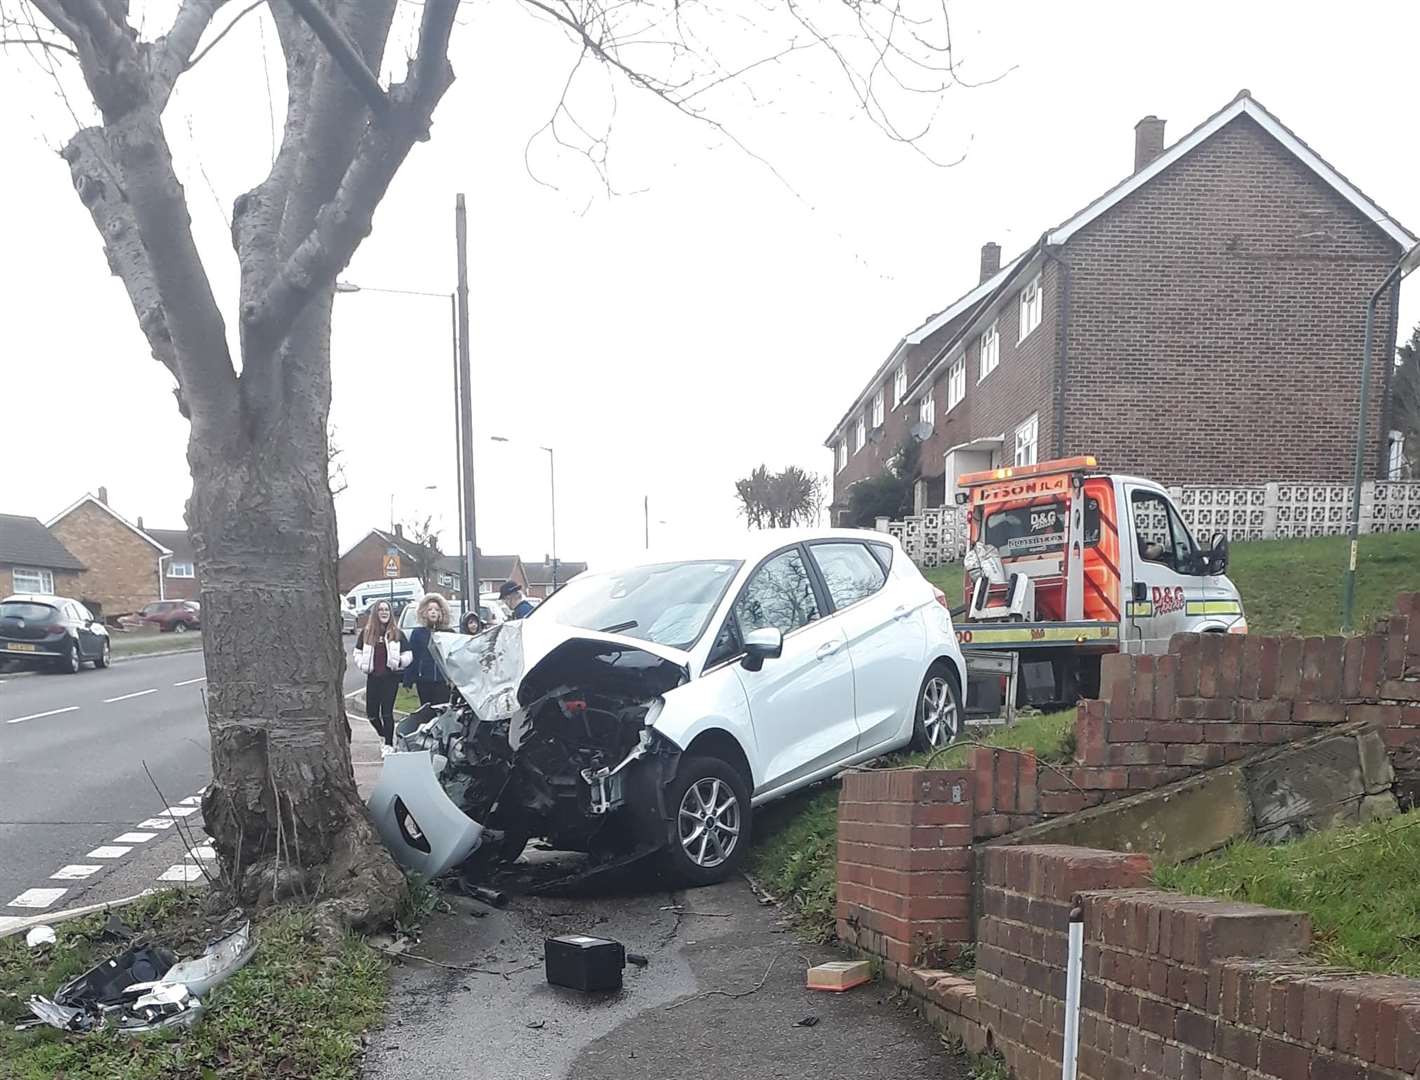 A car was written off after colliding with a tree in Bligh Way, Strood. (25899723)